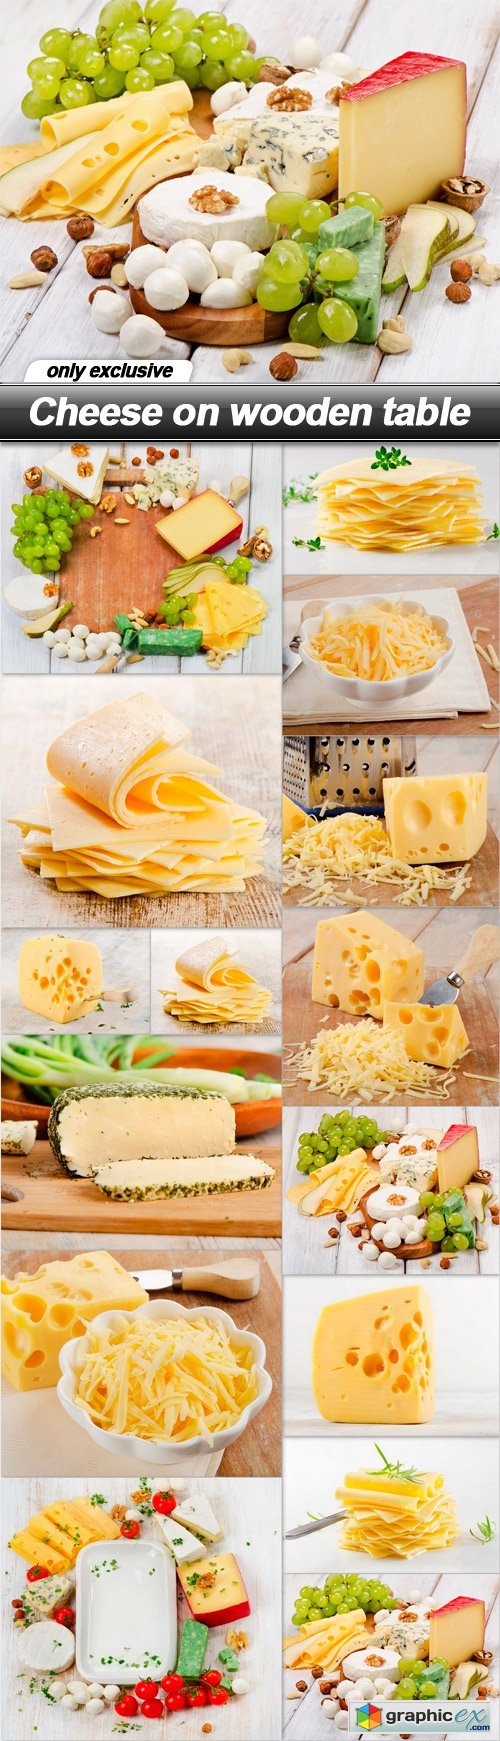 Cheese on wooden table - 15 UHQ JPEG